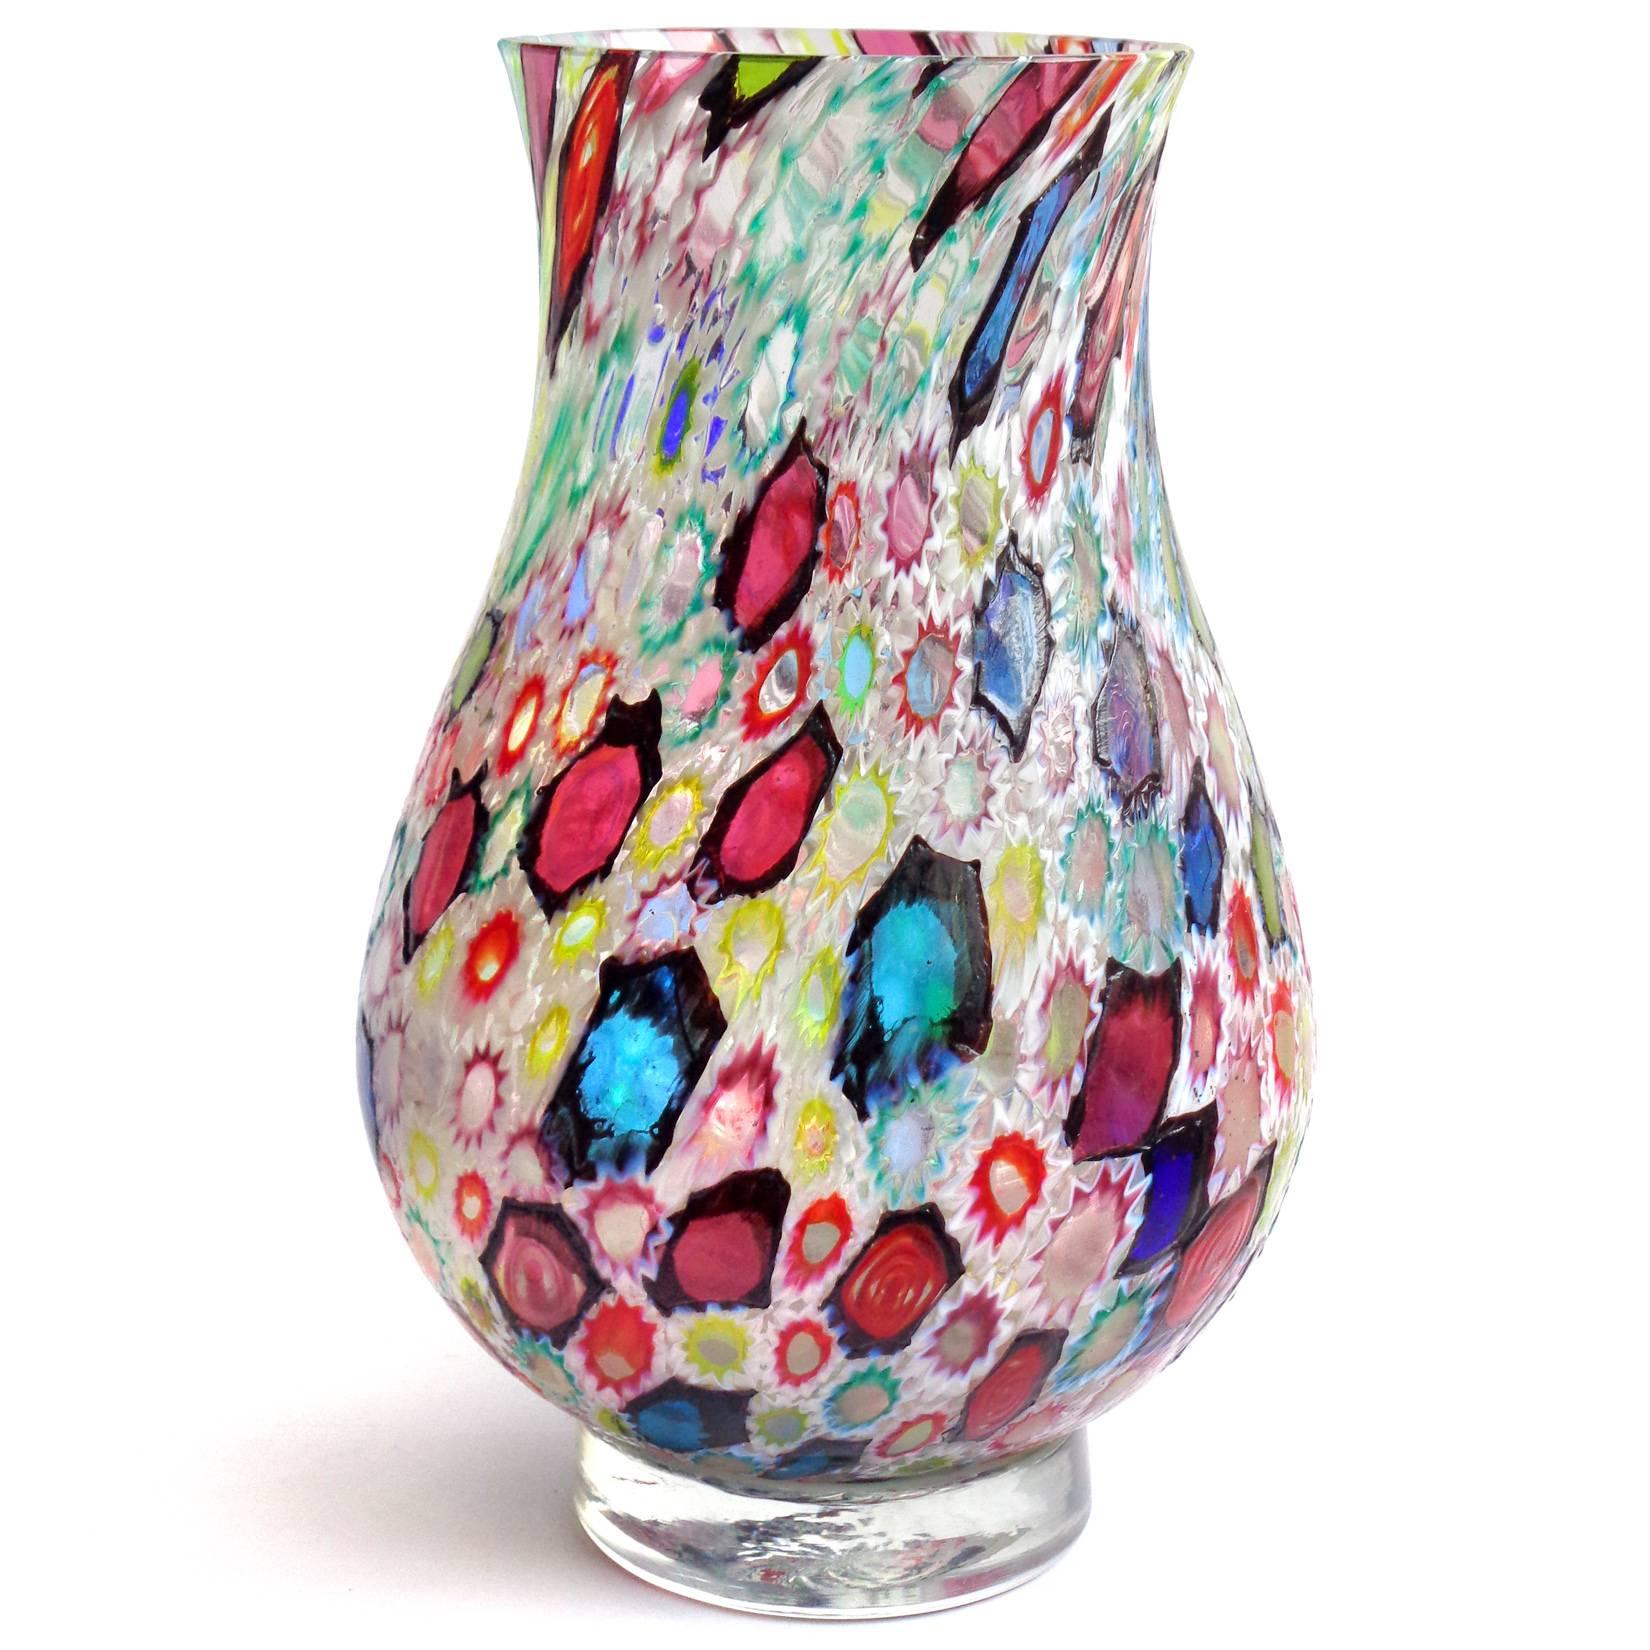 Free shipping worldwide! See details below description.

Incredible Murano multicolor Millefiori flower and star mosaic art glass large flower vase. Documented to the Fratelli Toso company. Many of the murrines are lined in white, but some are